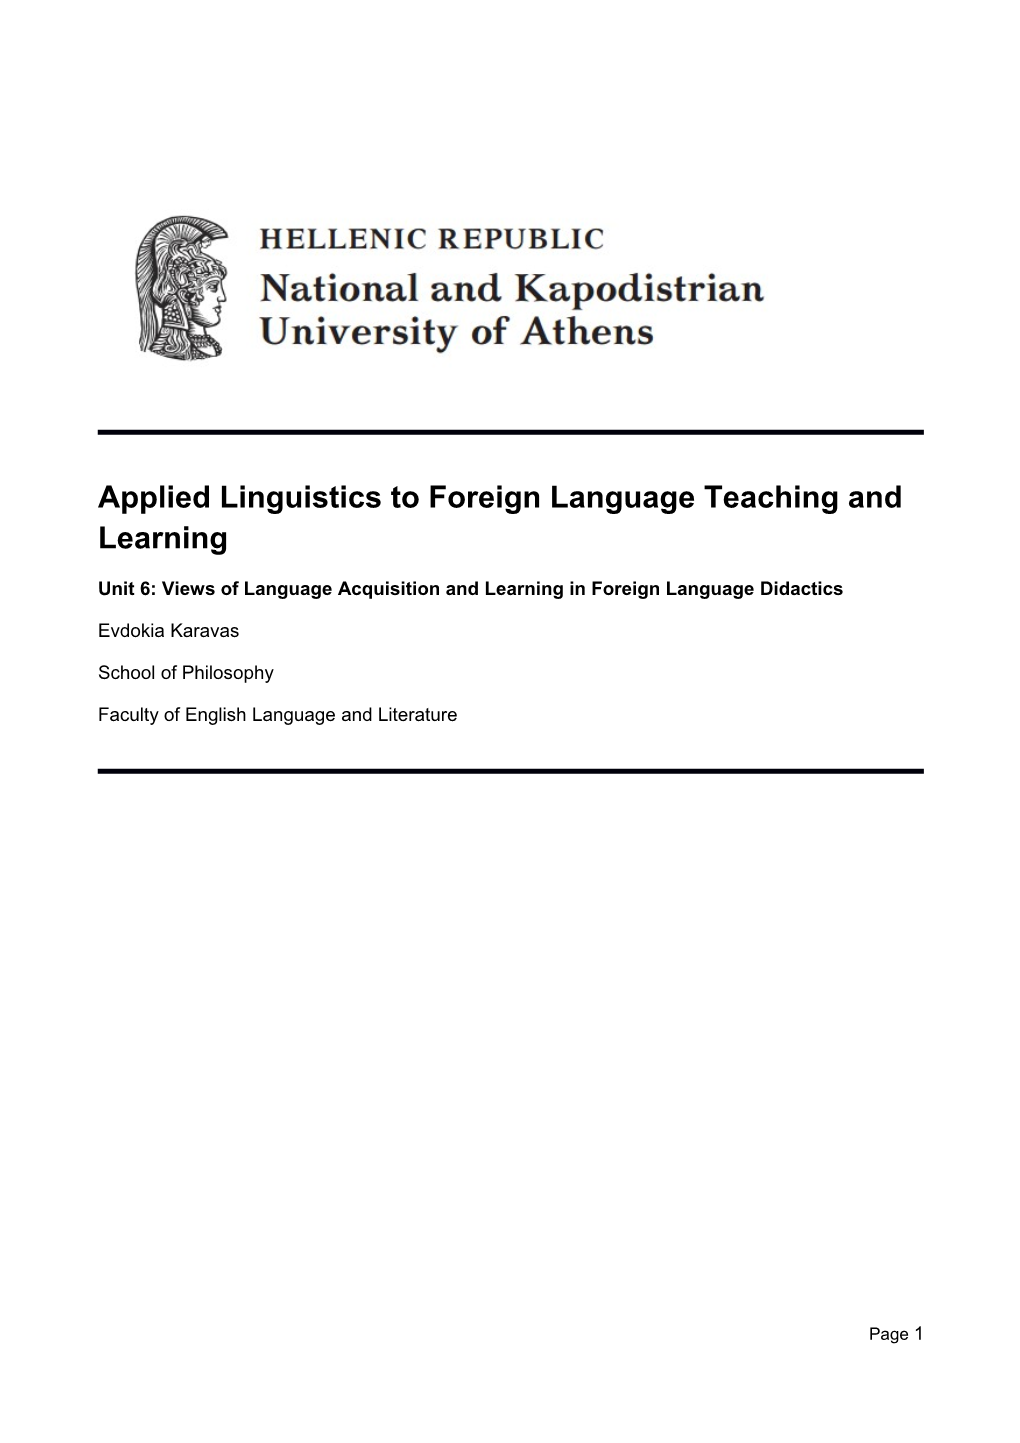 Views of Language Acquisition and Learning in Foreign Language Didactics